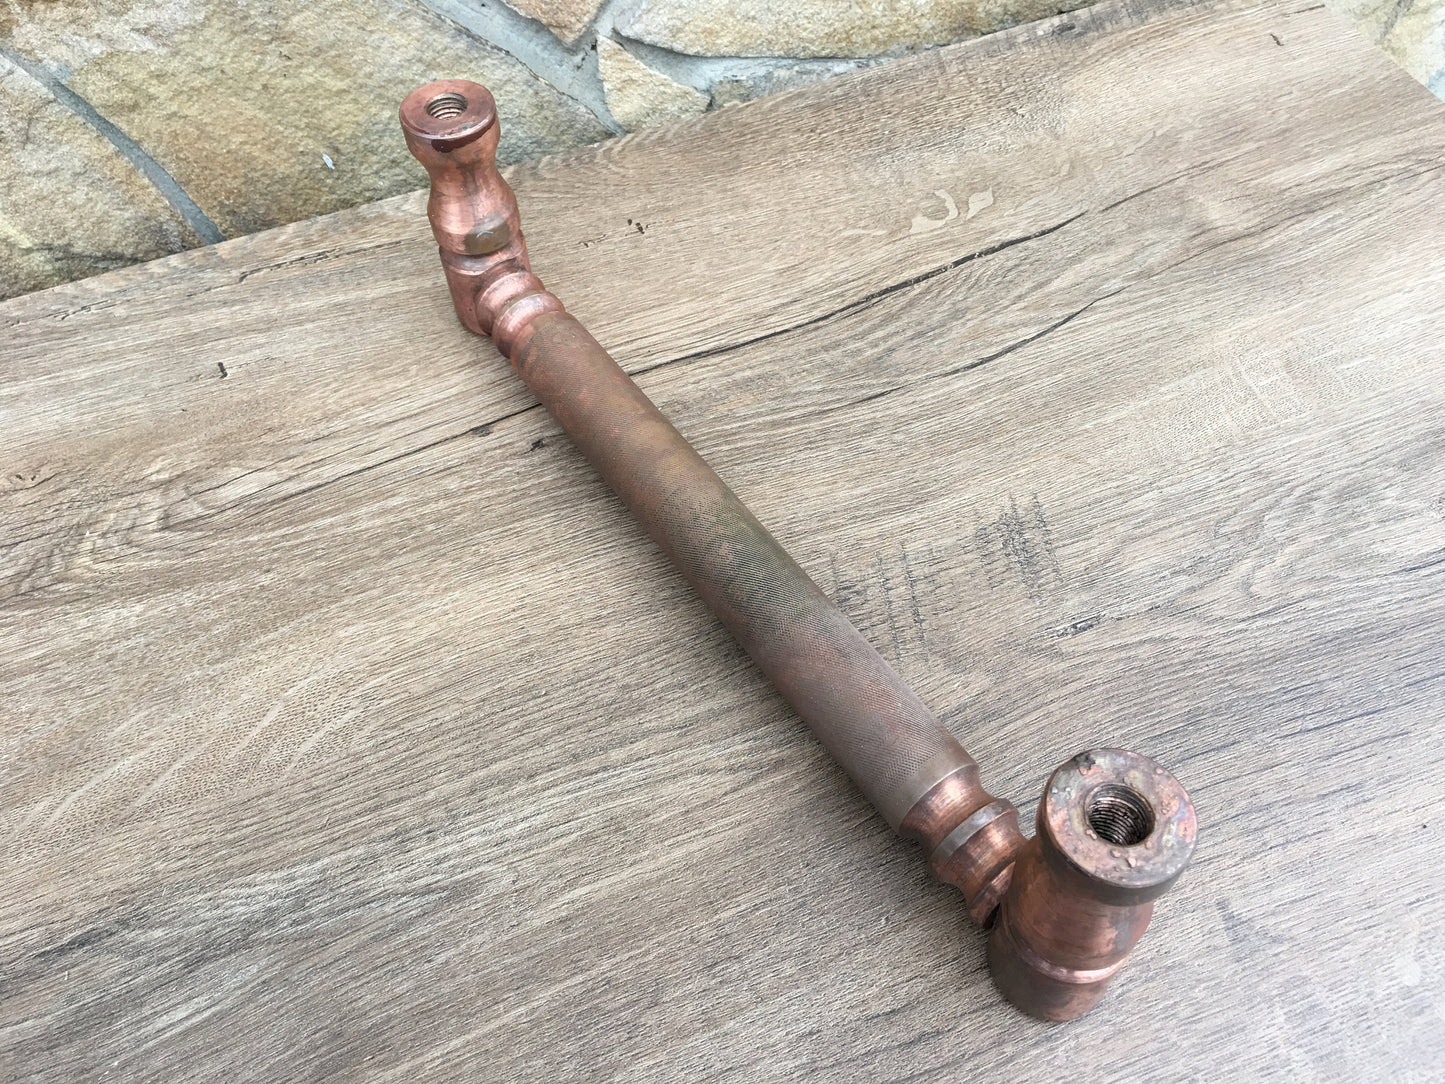 Copper door handle, barn door handle, door handle, barn door pull, door handles, copper gift, door pulls, garage pull, handle for wickets